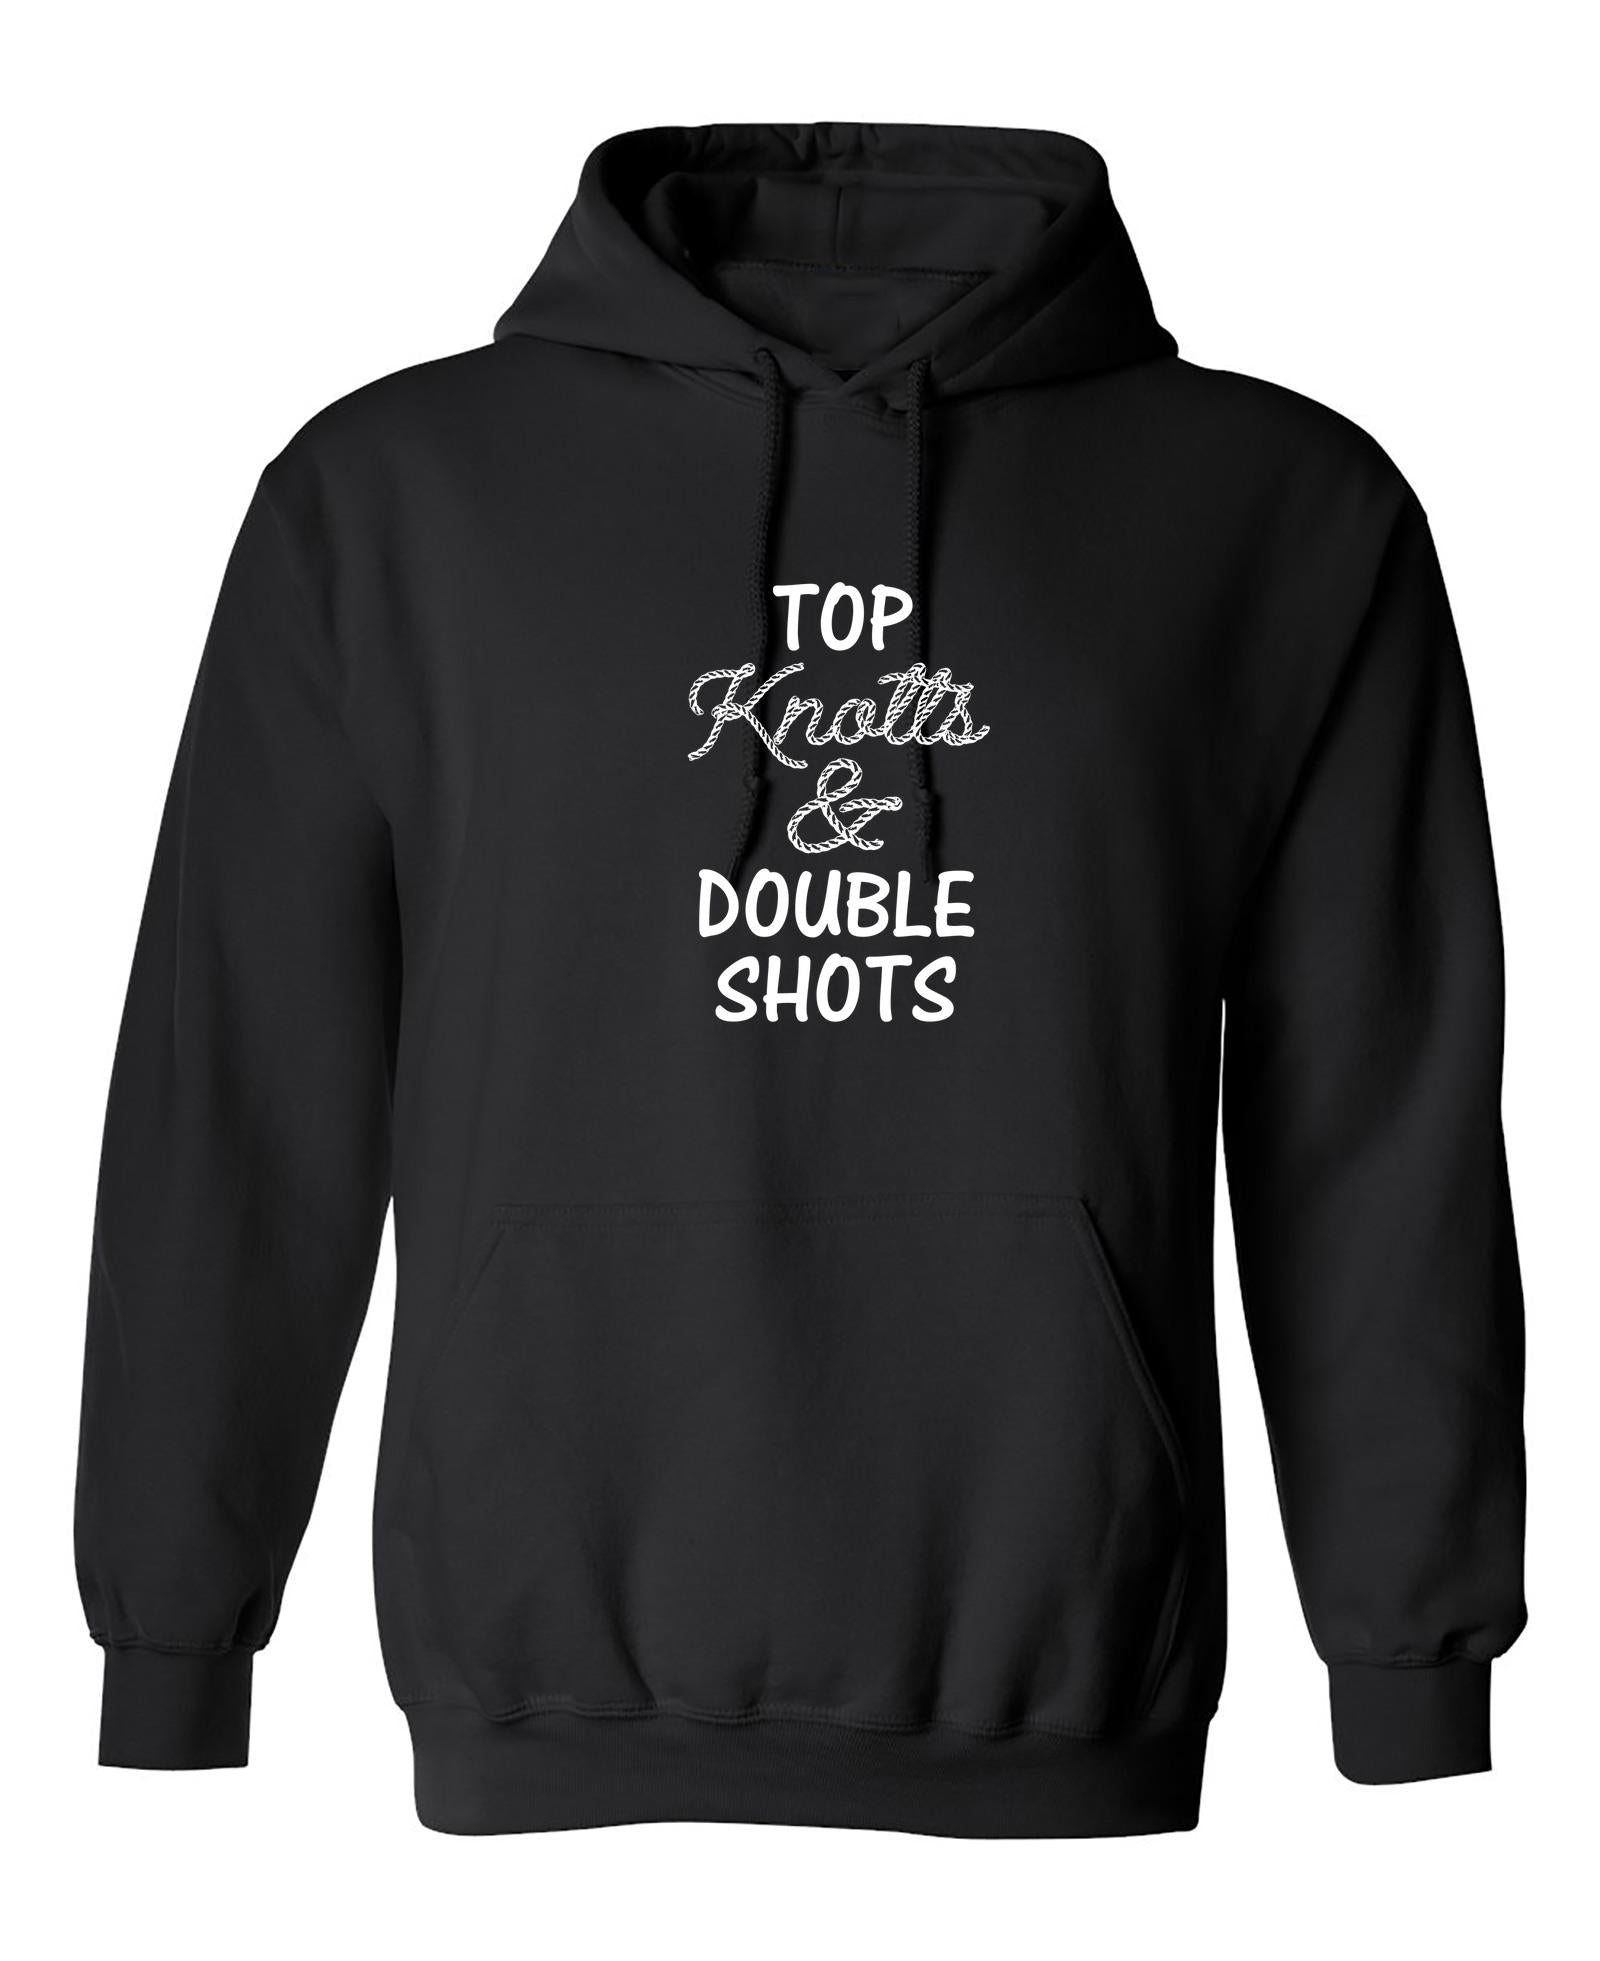 Funny T-Shirts design "Top knotts and double shots"